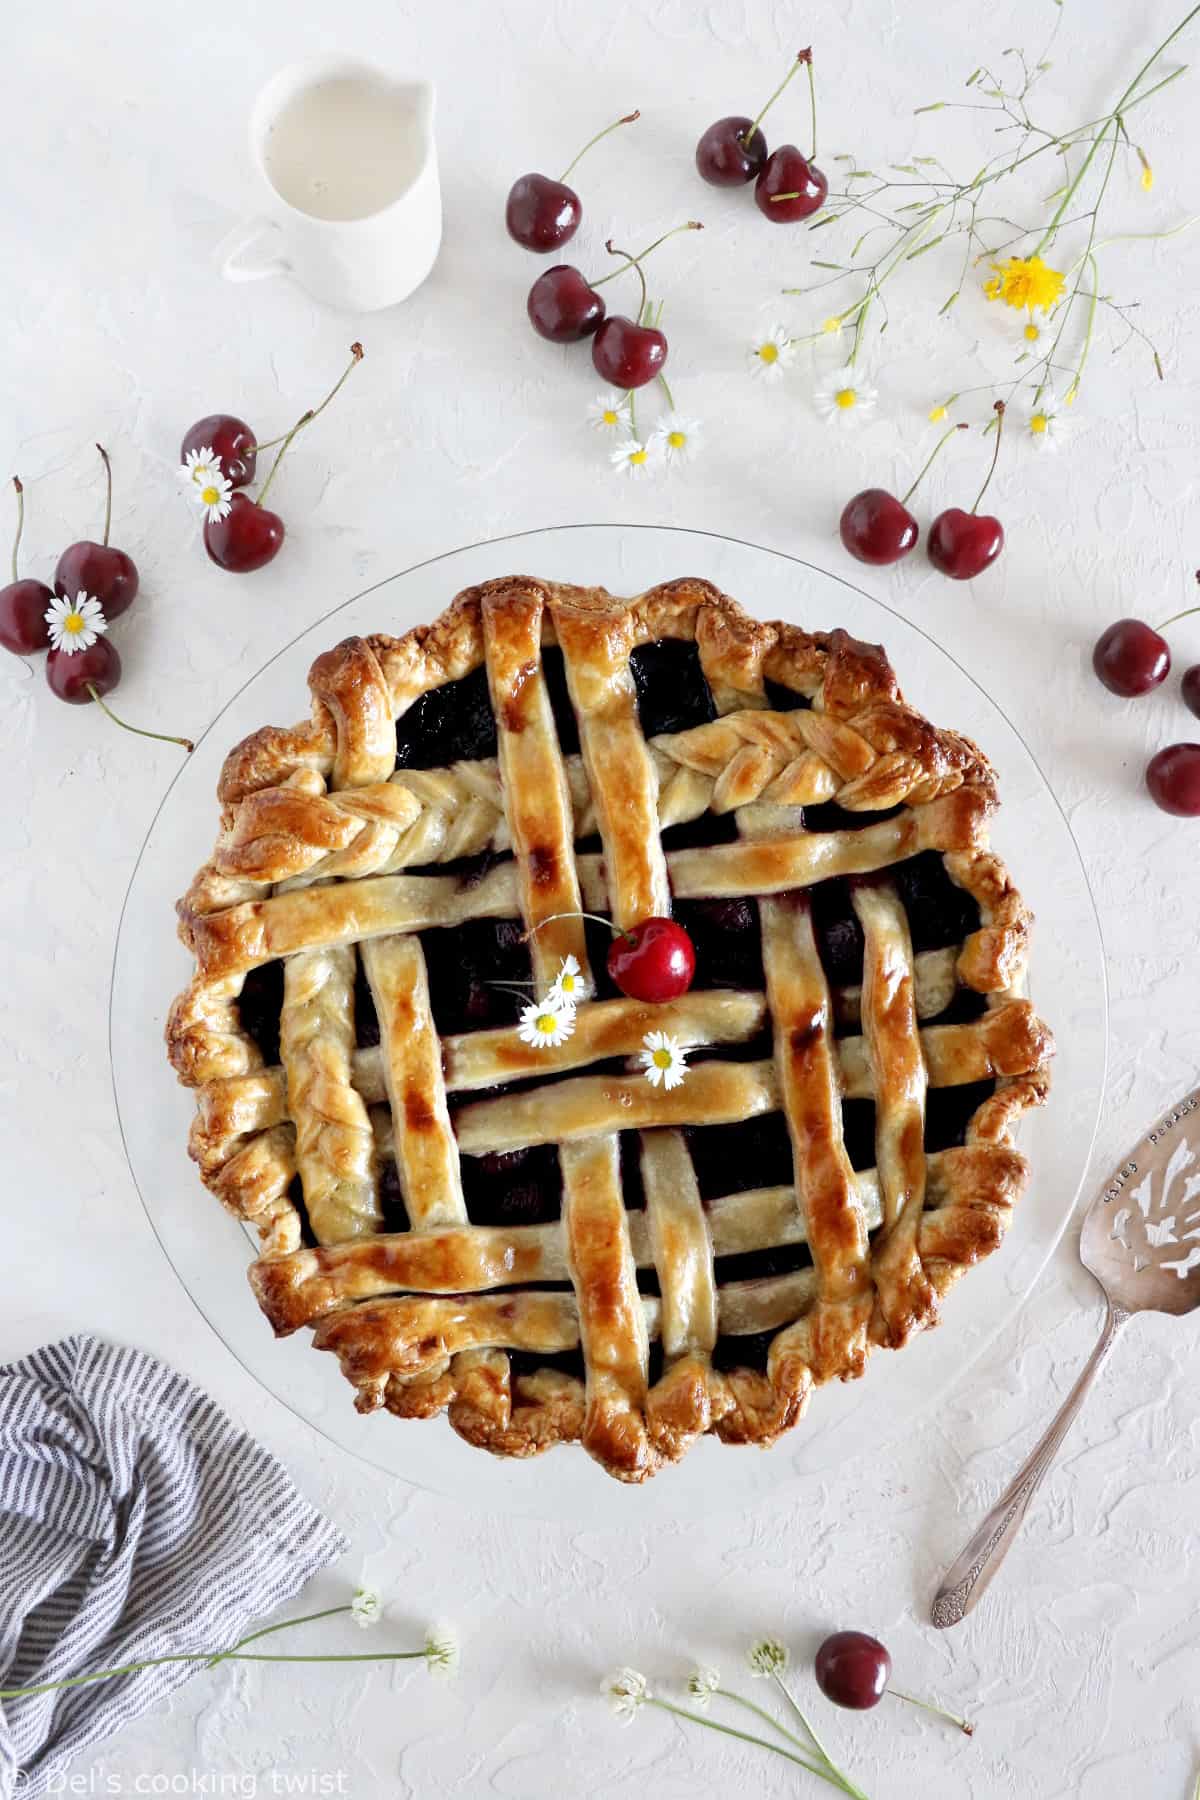 Say hello to the best homemade cherry pie, baked from scratch with an easy butter pie crust.